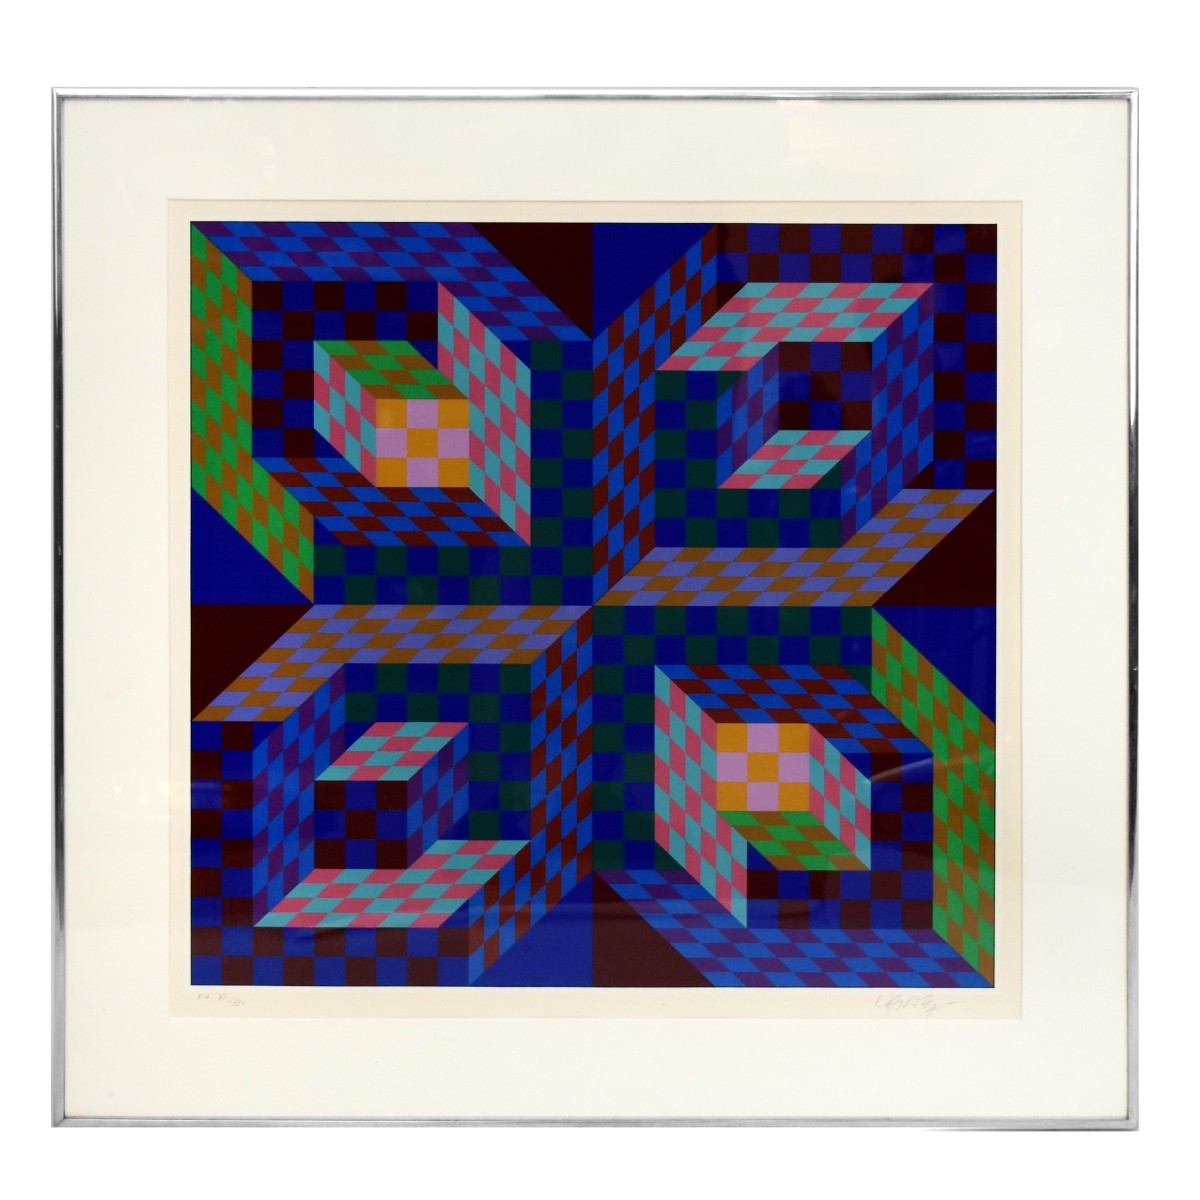 Victor Vasarely, Hungarian (1906 - 1997)